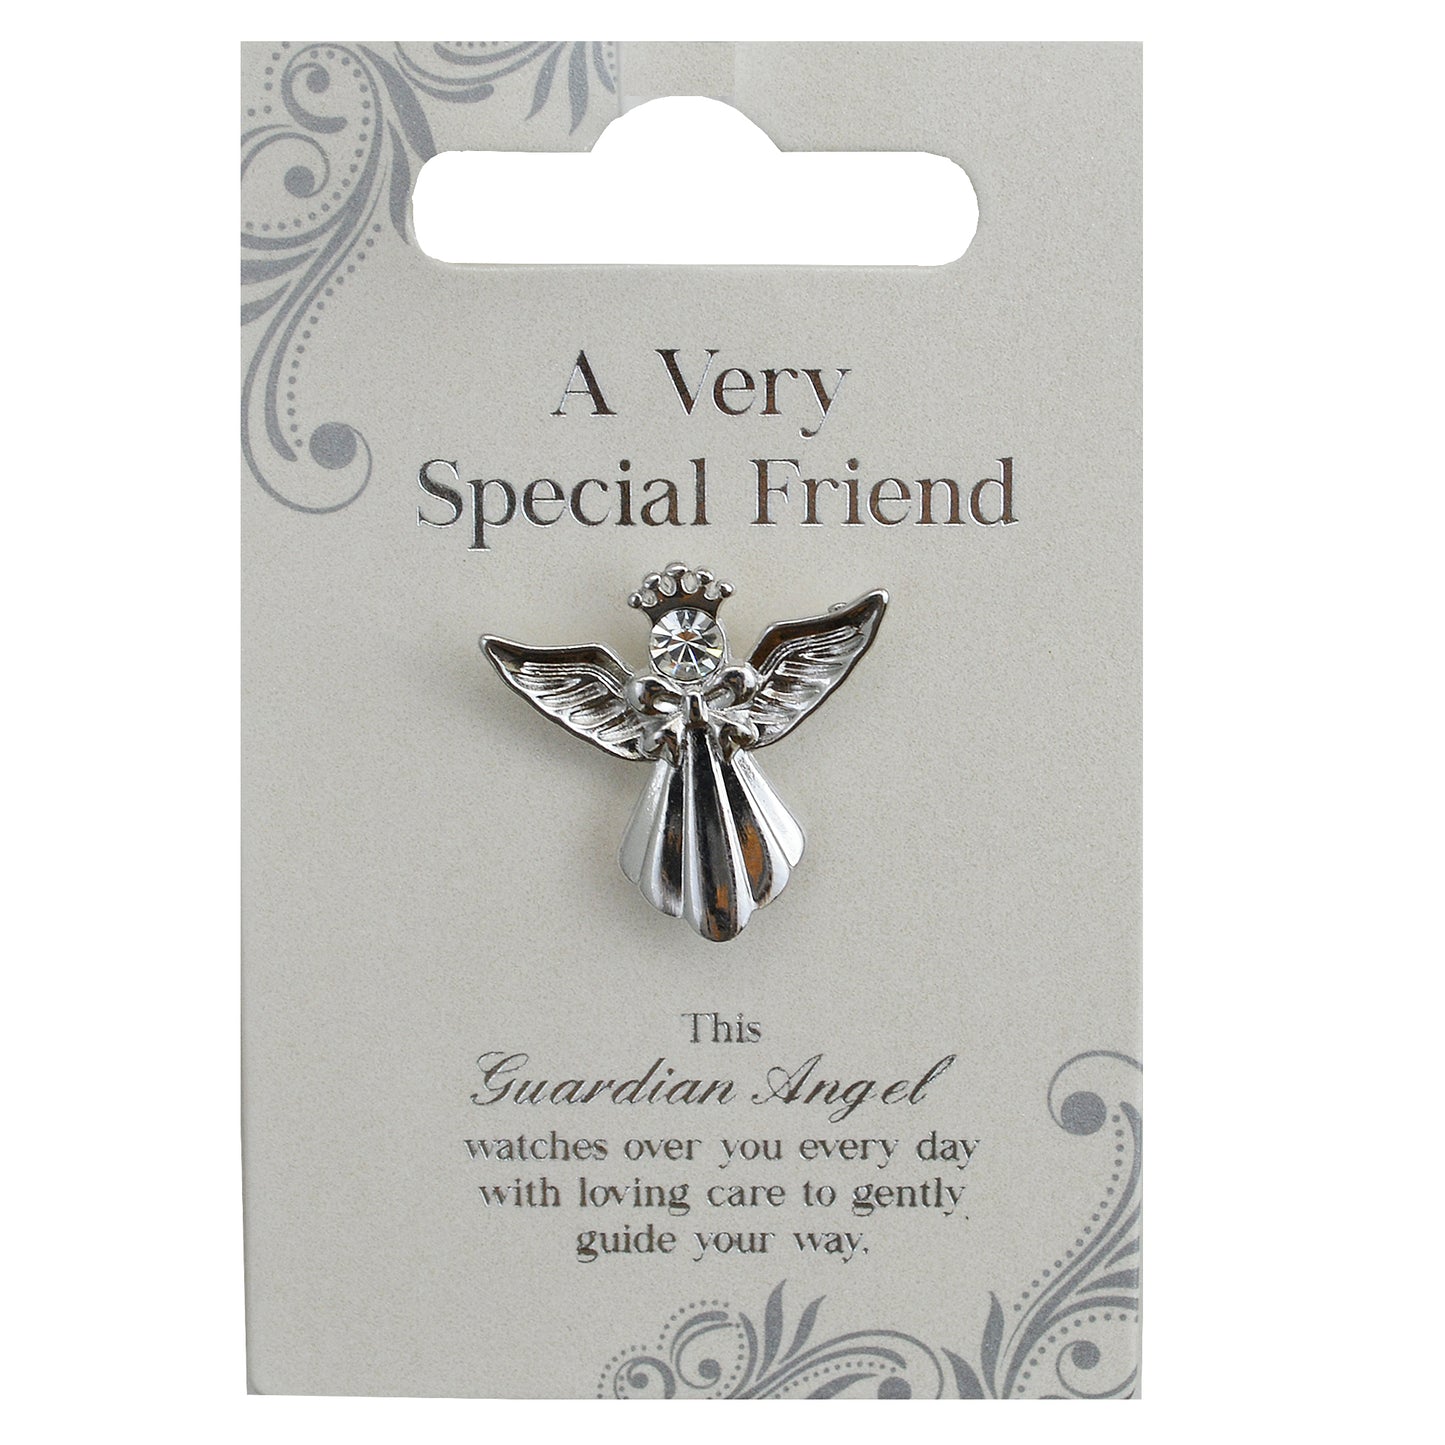 Very Special Friend Silver Coloured Angel Pin With Gem Stone